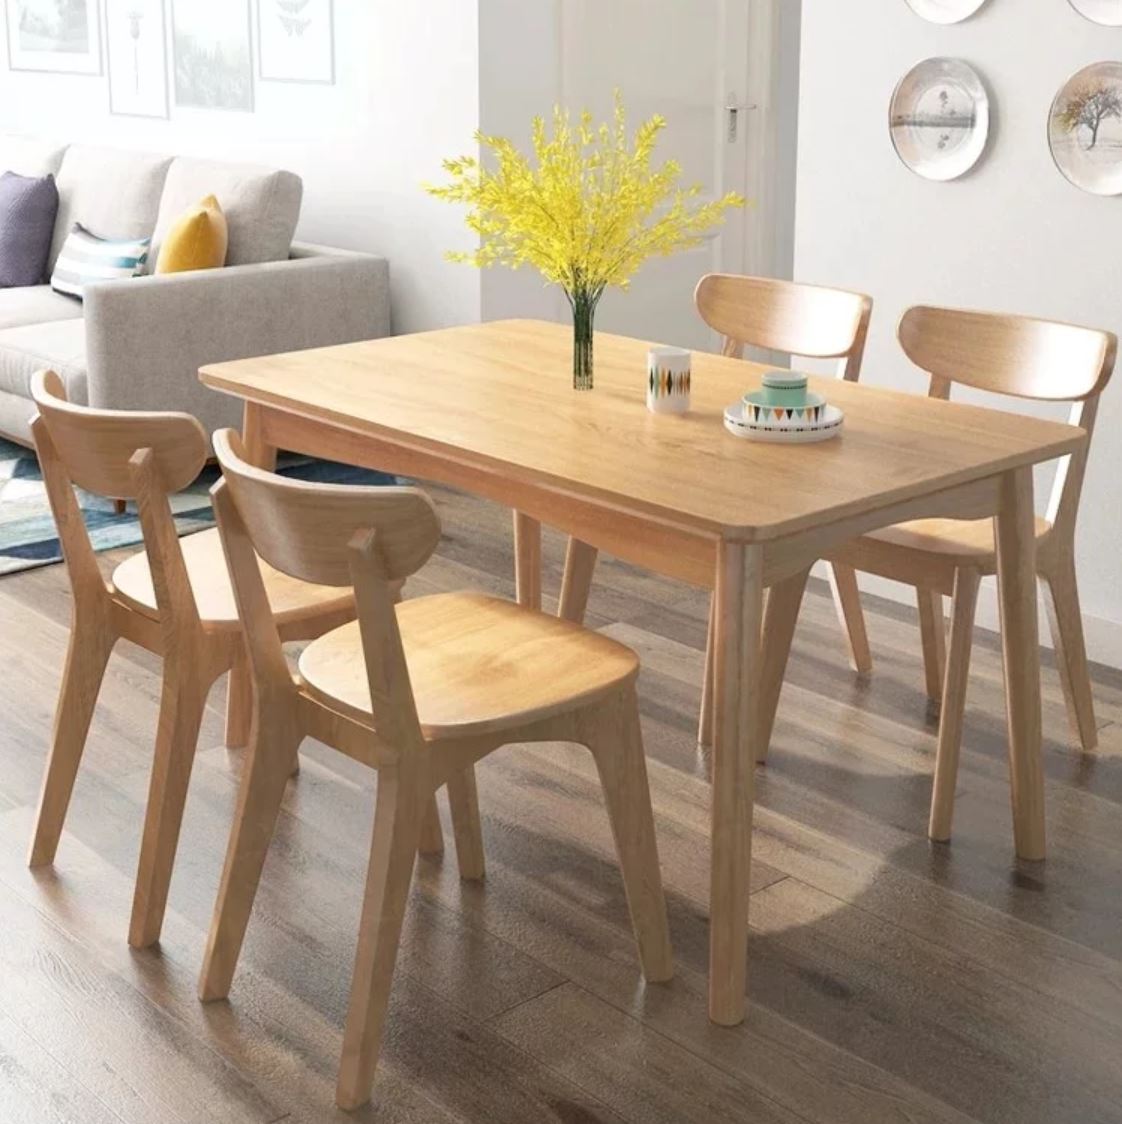 FINLEY Modern Rustic Solid Pine Wood Dining Table